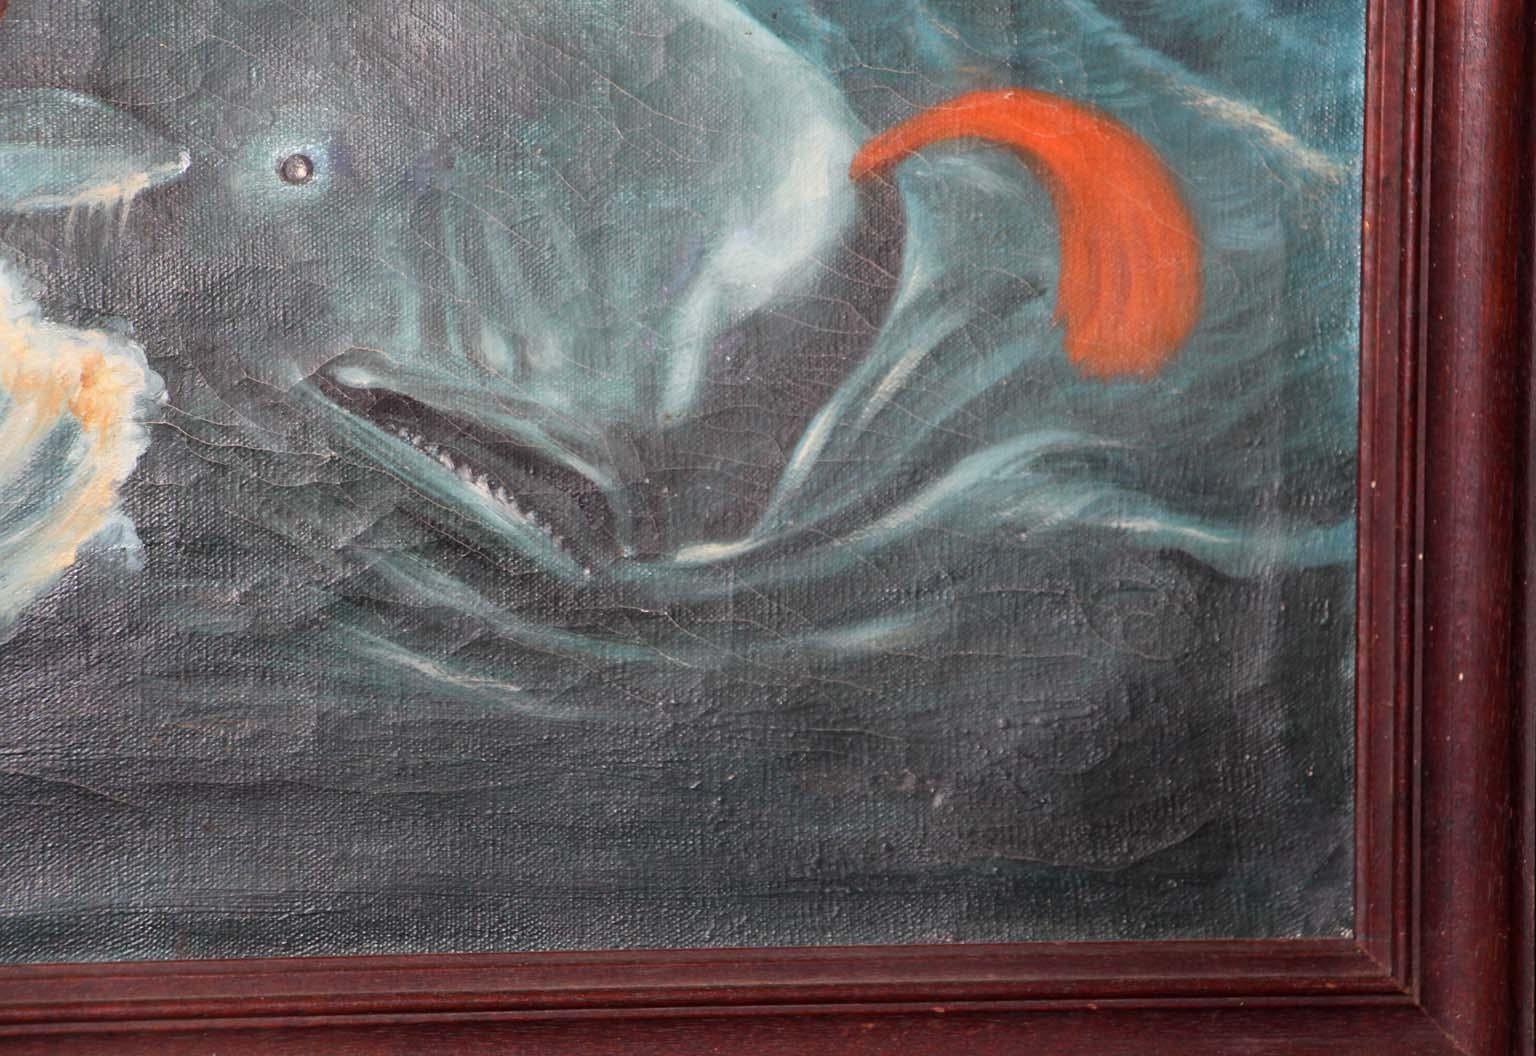 19th Century Oil Painting Capturing a Sperm Whale In Distressed Condition In Sag Harbor, NY